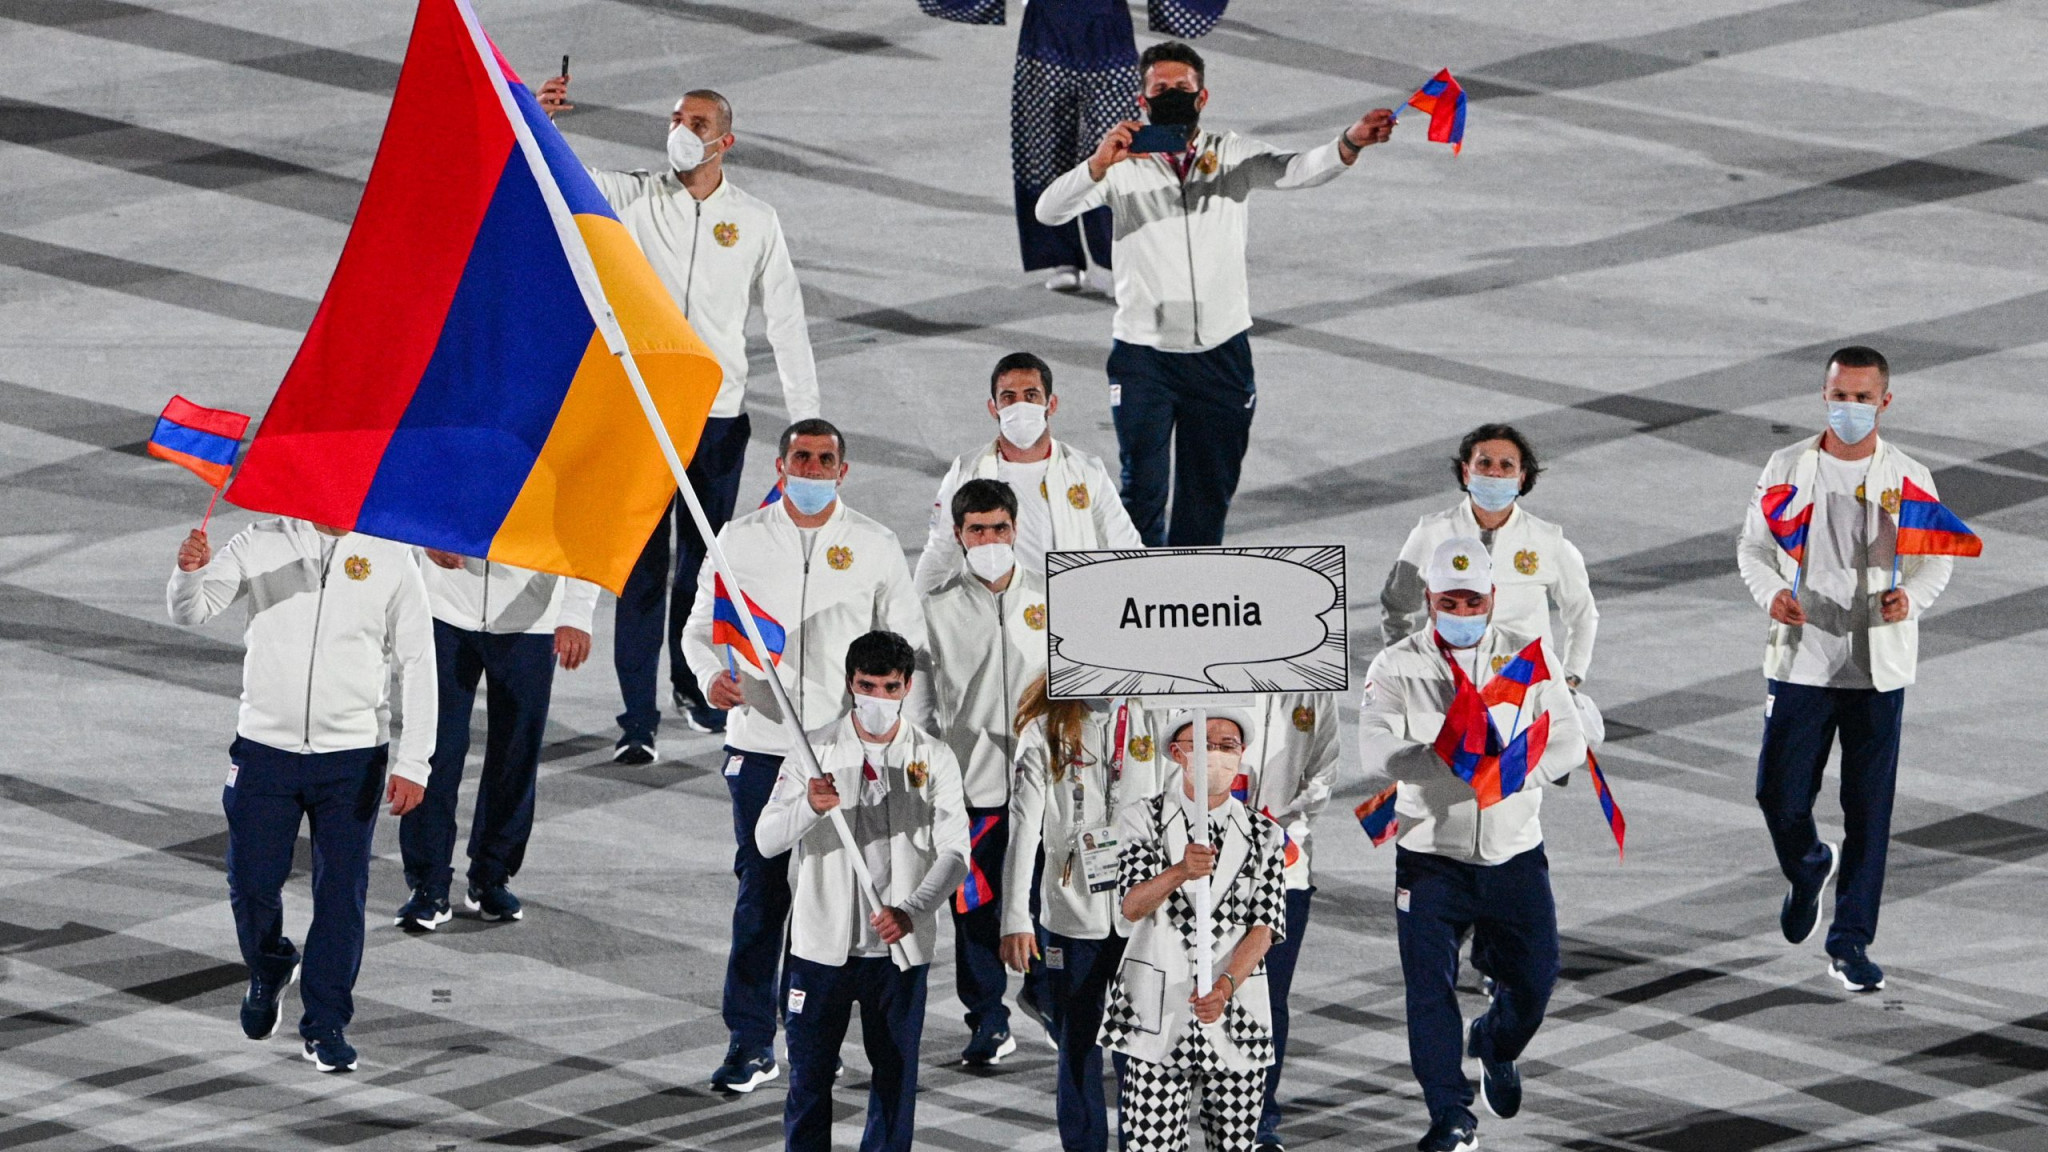 Armenia’s Prime Minister Nikol Pashinyan has urged officials to accelerate preparations for Paris 2024 after the country won just two silver medals at Tokyo 2020  ©Getty Images